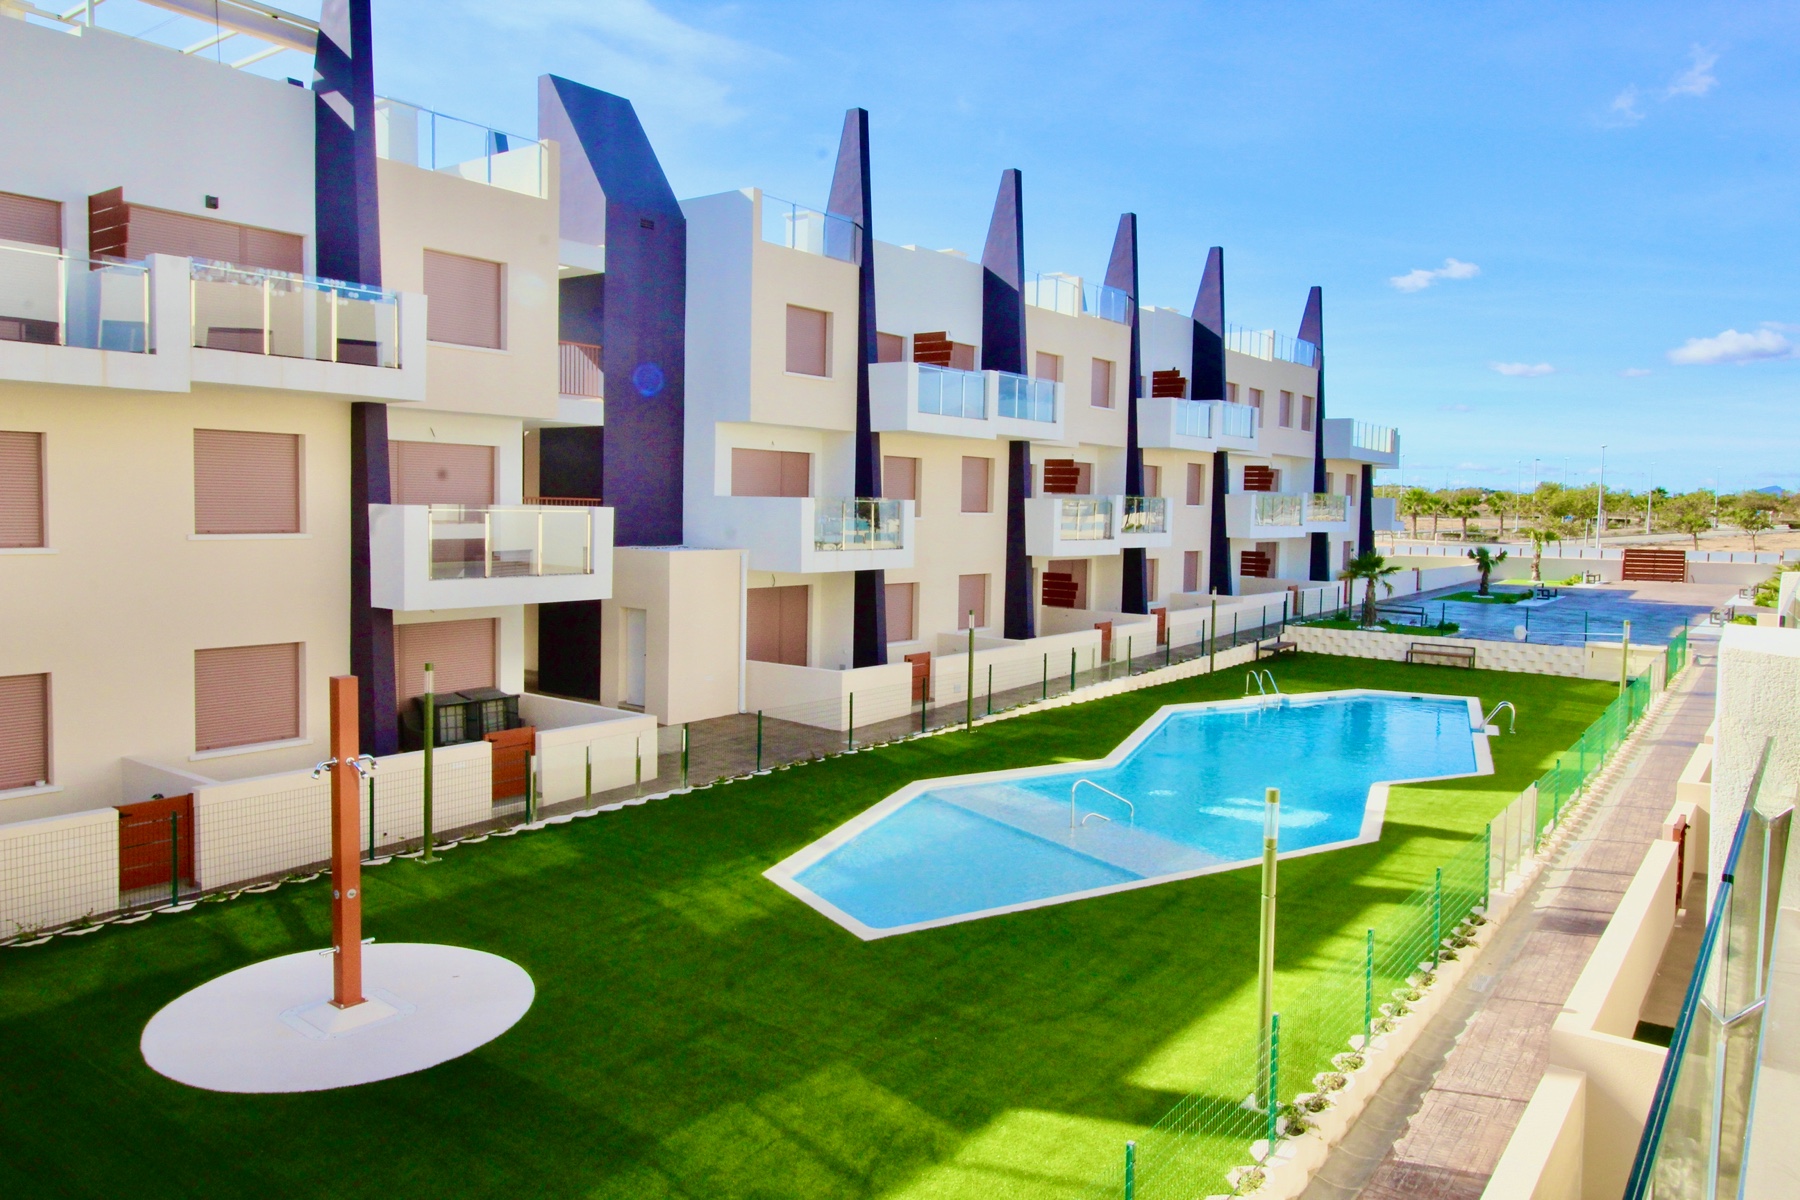 For sale: 2 bedroom apartment / flat in Mil Palmeras